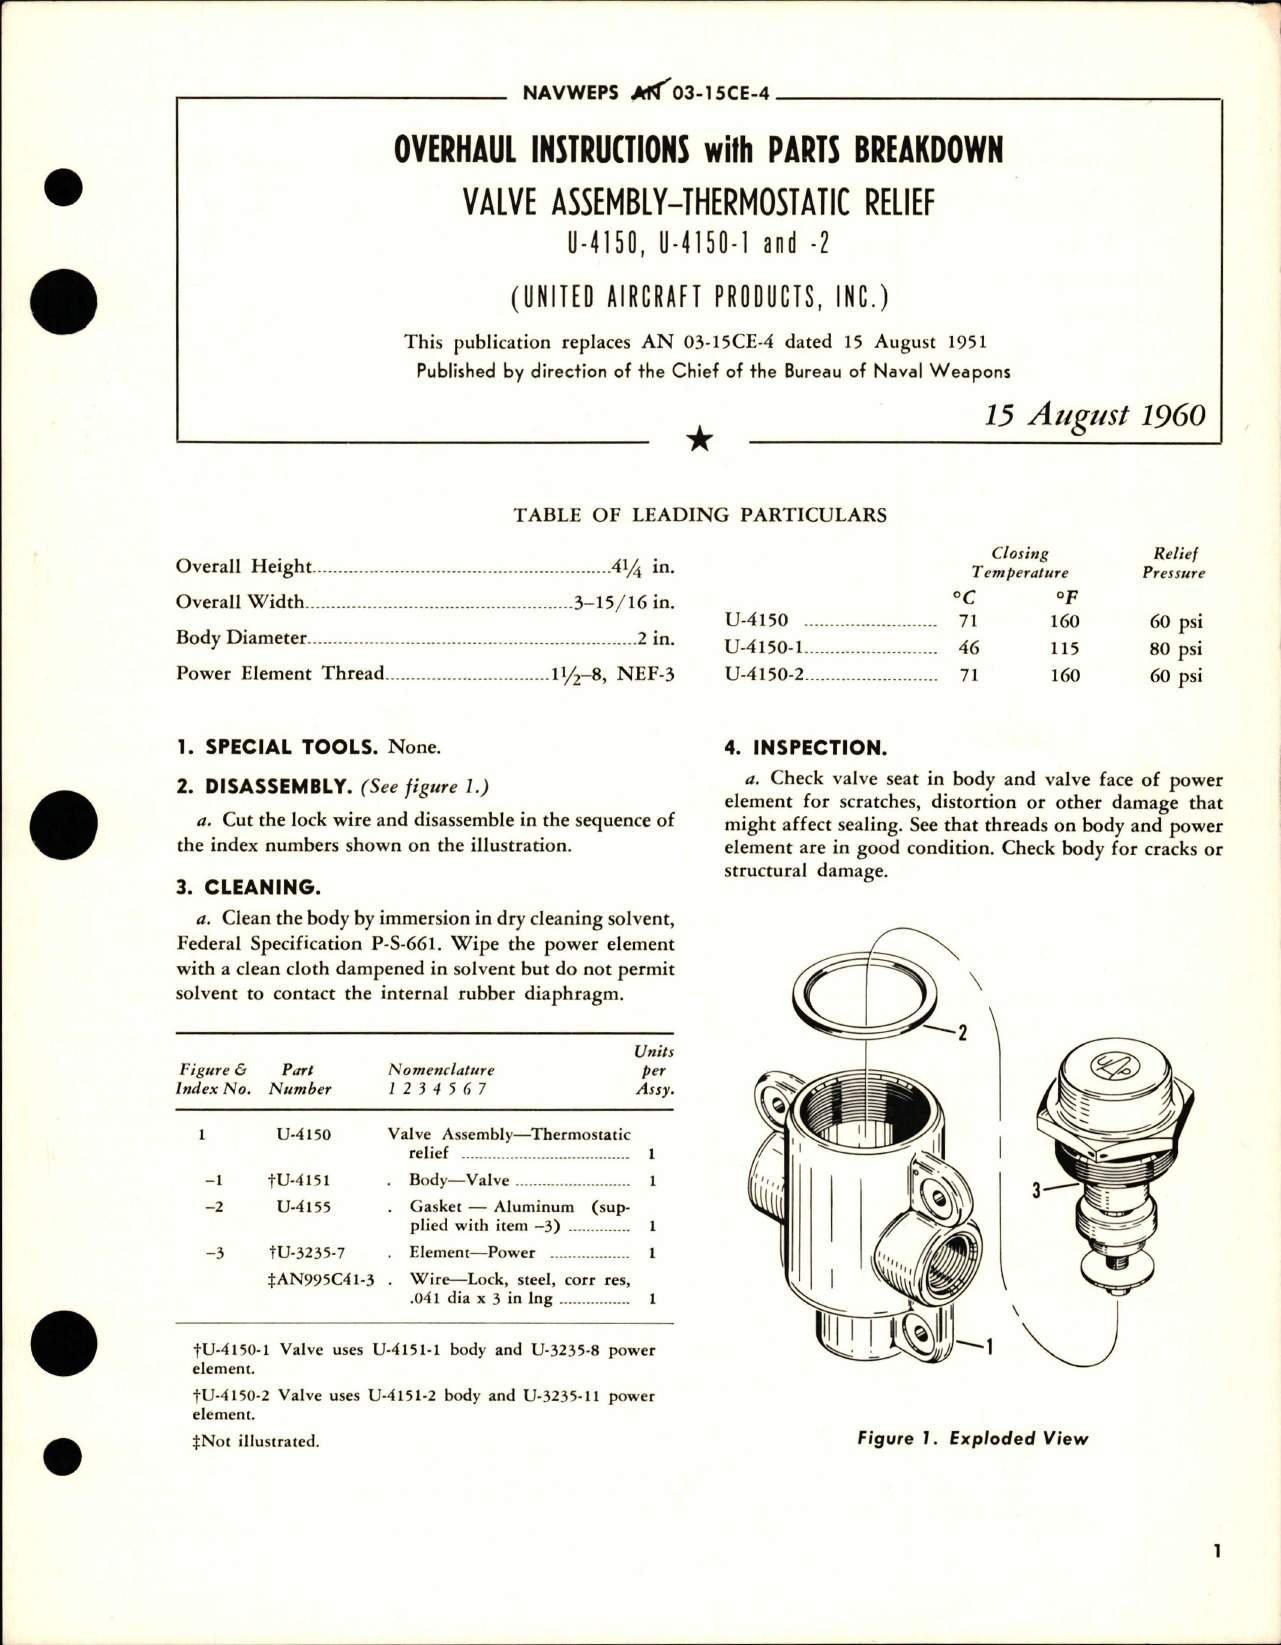 Sample page 1 from AirCorps Library document: Overhaul Instructions with Parts Breakdown for Valve Assembly - Thermostatic Relief - U-4150, U-4151-1, and U-4150-2 